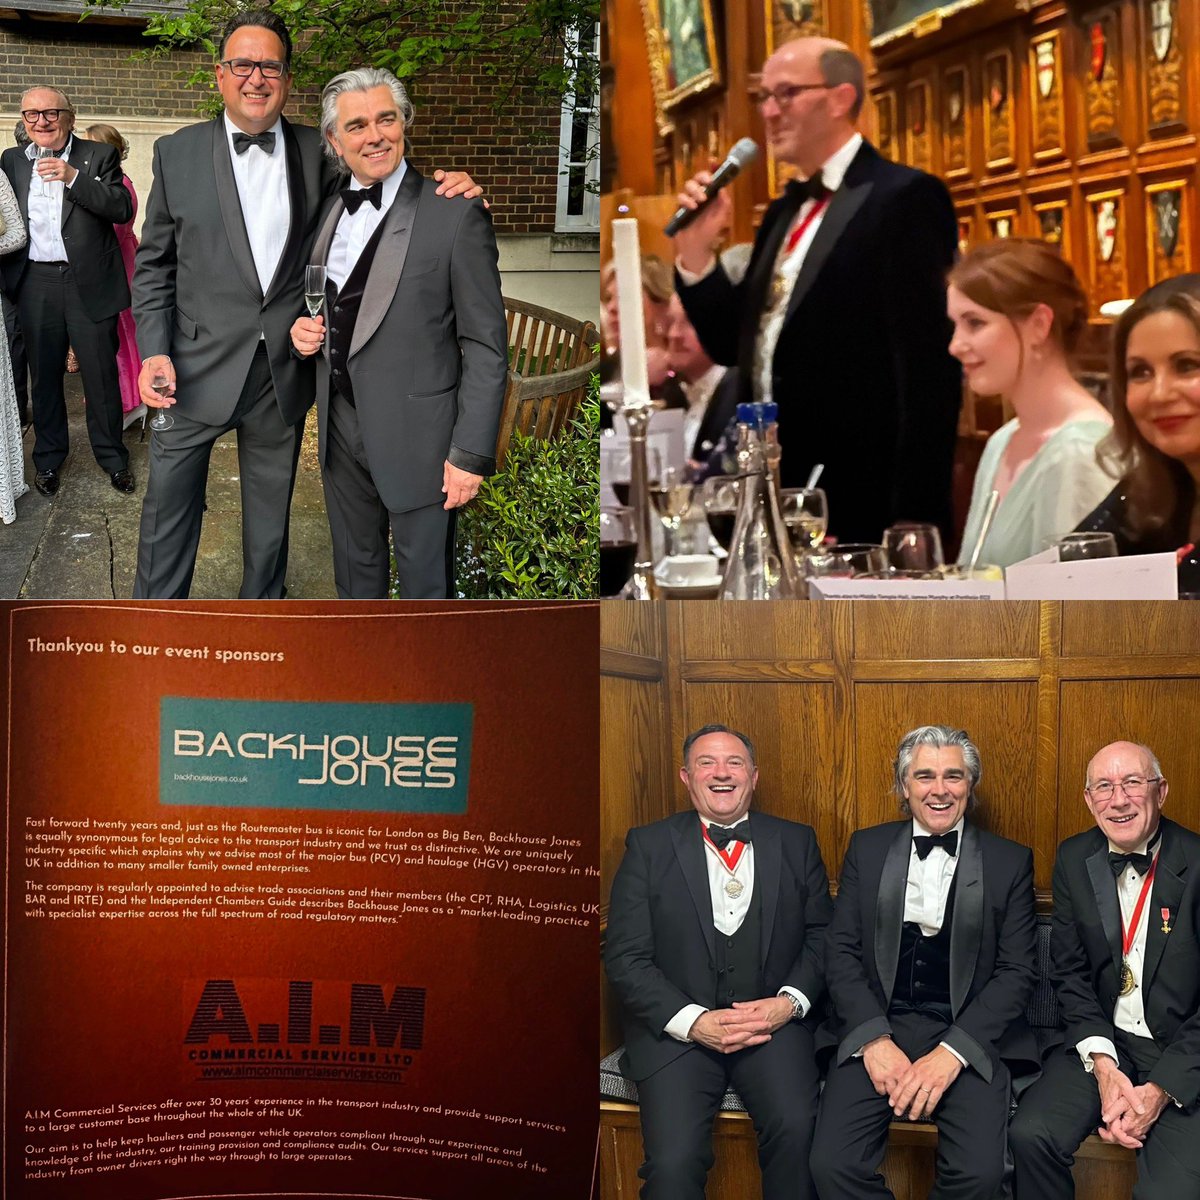 Delighted to sponsor the @Carmen_Company Master Carmen’s Charity Ball. Aways fun, but an important event for raising funds for the Carmen’s two charities - supporting a wide range of educational and training needs as well as the transport and logistics industries.